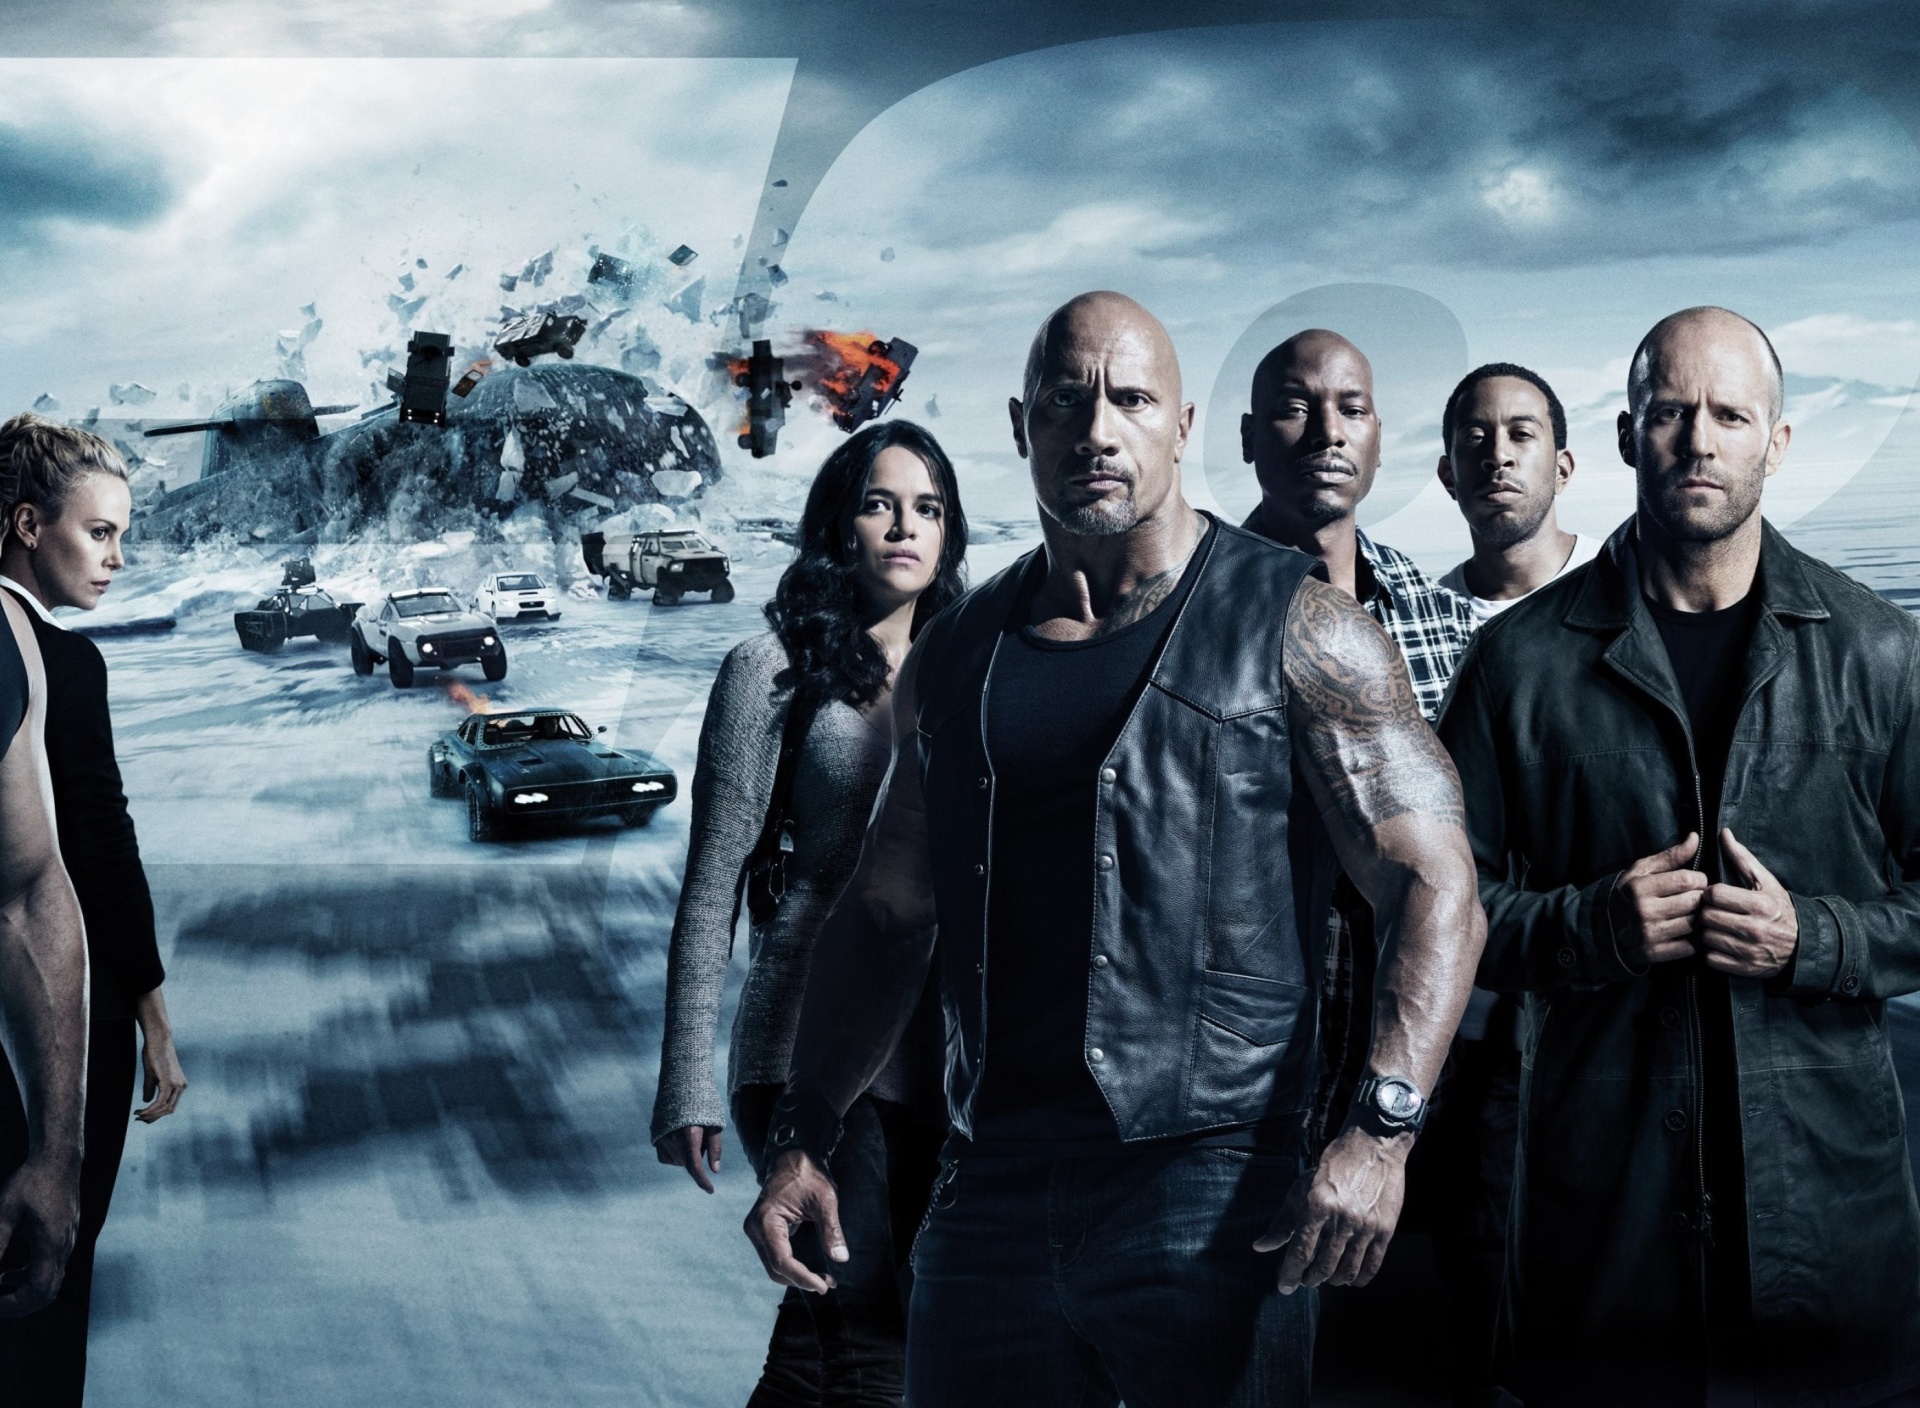 The Fate of the Furious with Vin Diesel, Dwayne Johnson, Charlize Theron screenshot #1 1920x1408